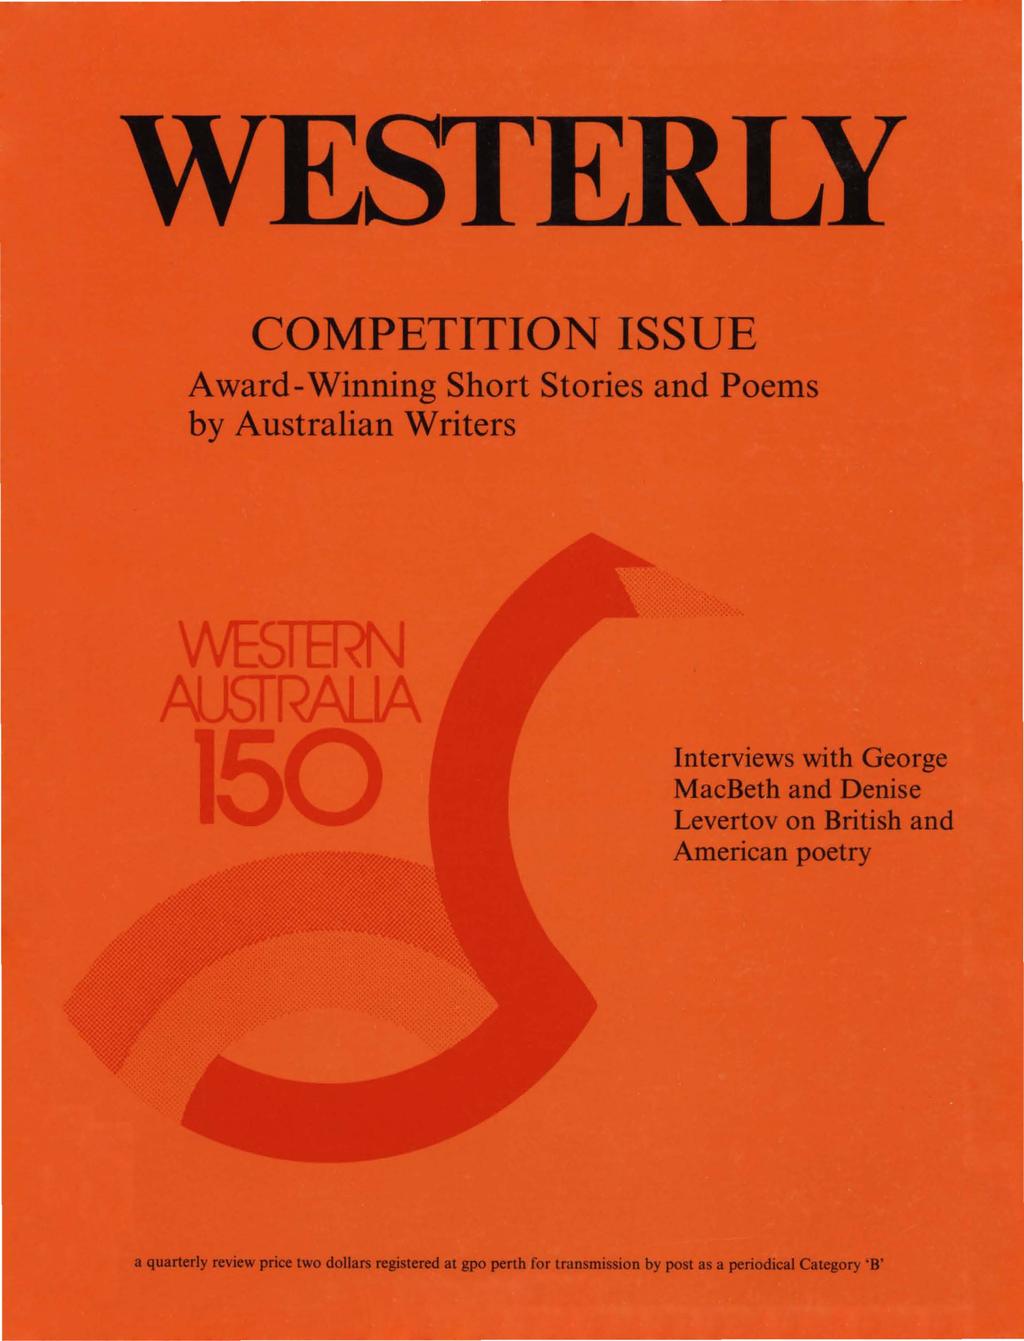 ESTERLY COMPETITION ISSUE Award-Winning Short Stories and Poems by Australian Writers Interviews with George MacBeth and Denise Levertov on